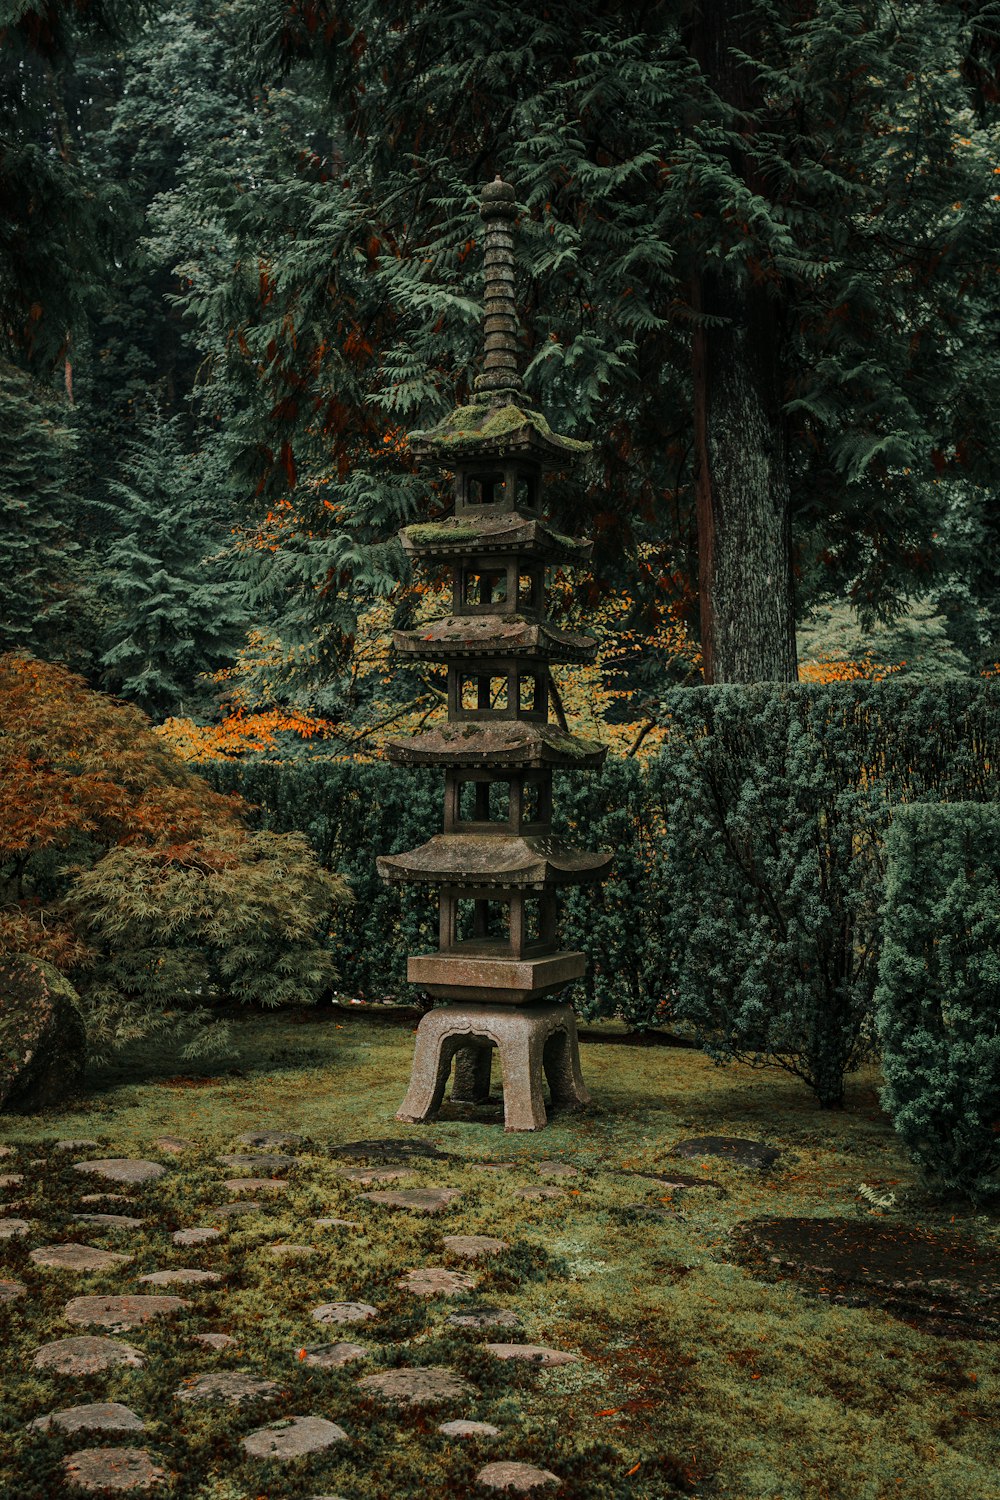 a stone pagoda in the middle of a garden